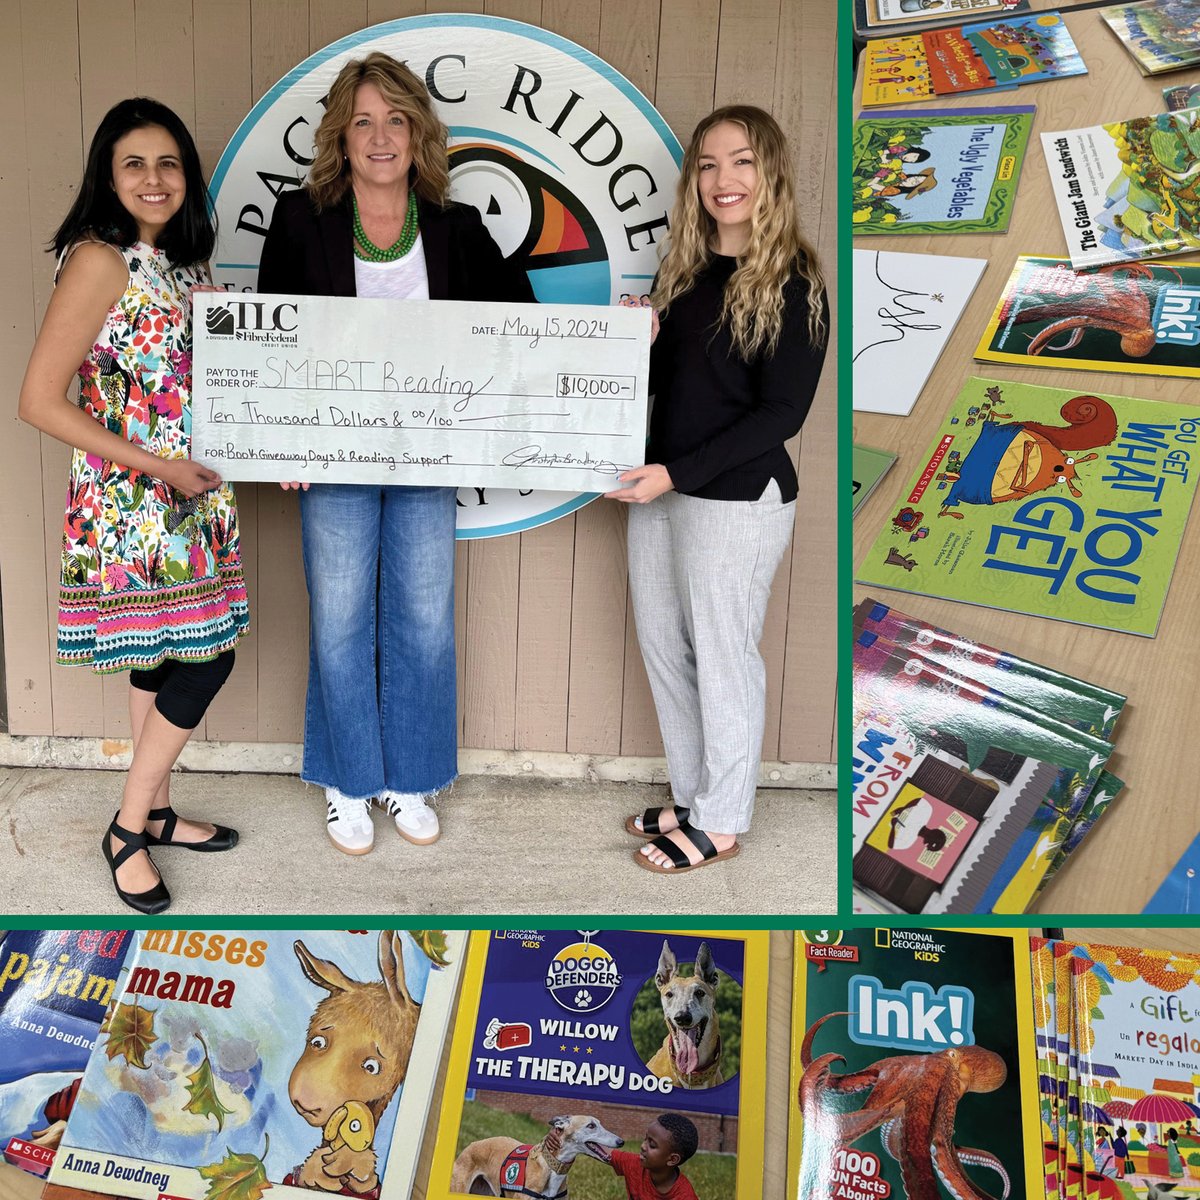 Feel Good Friday news! We gifted a $10,000 grant to SMART Reading to provide books and reading support for 284 students at five Oregon Coast Title 1 schools! Read the whole story at fibrecu.com/fibre-family/c…